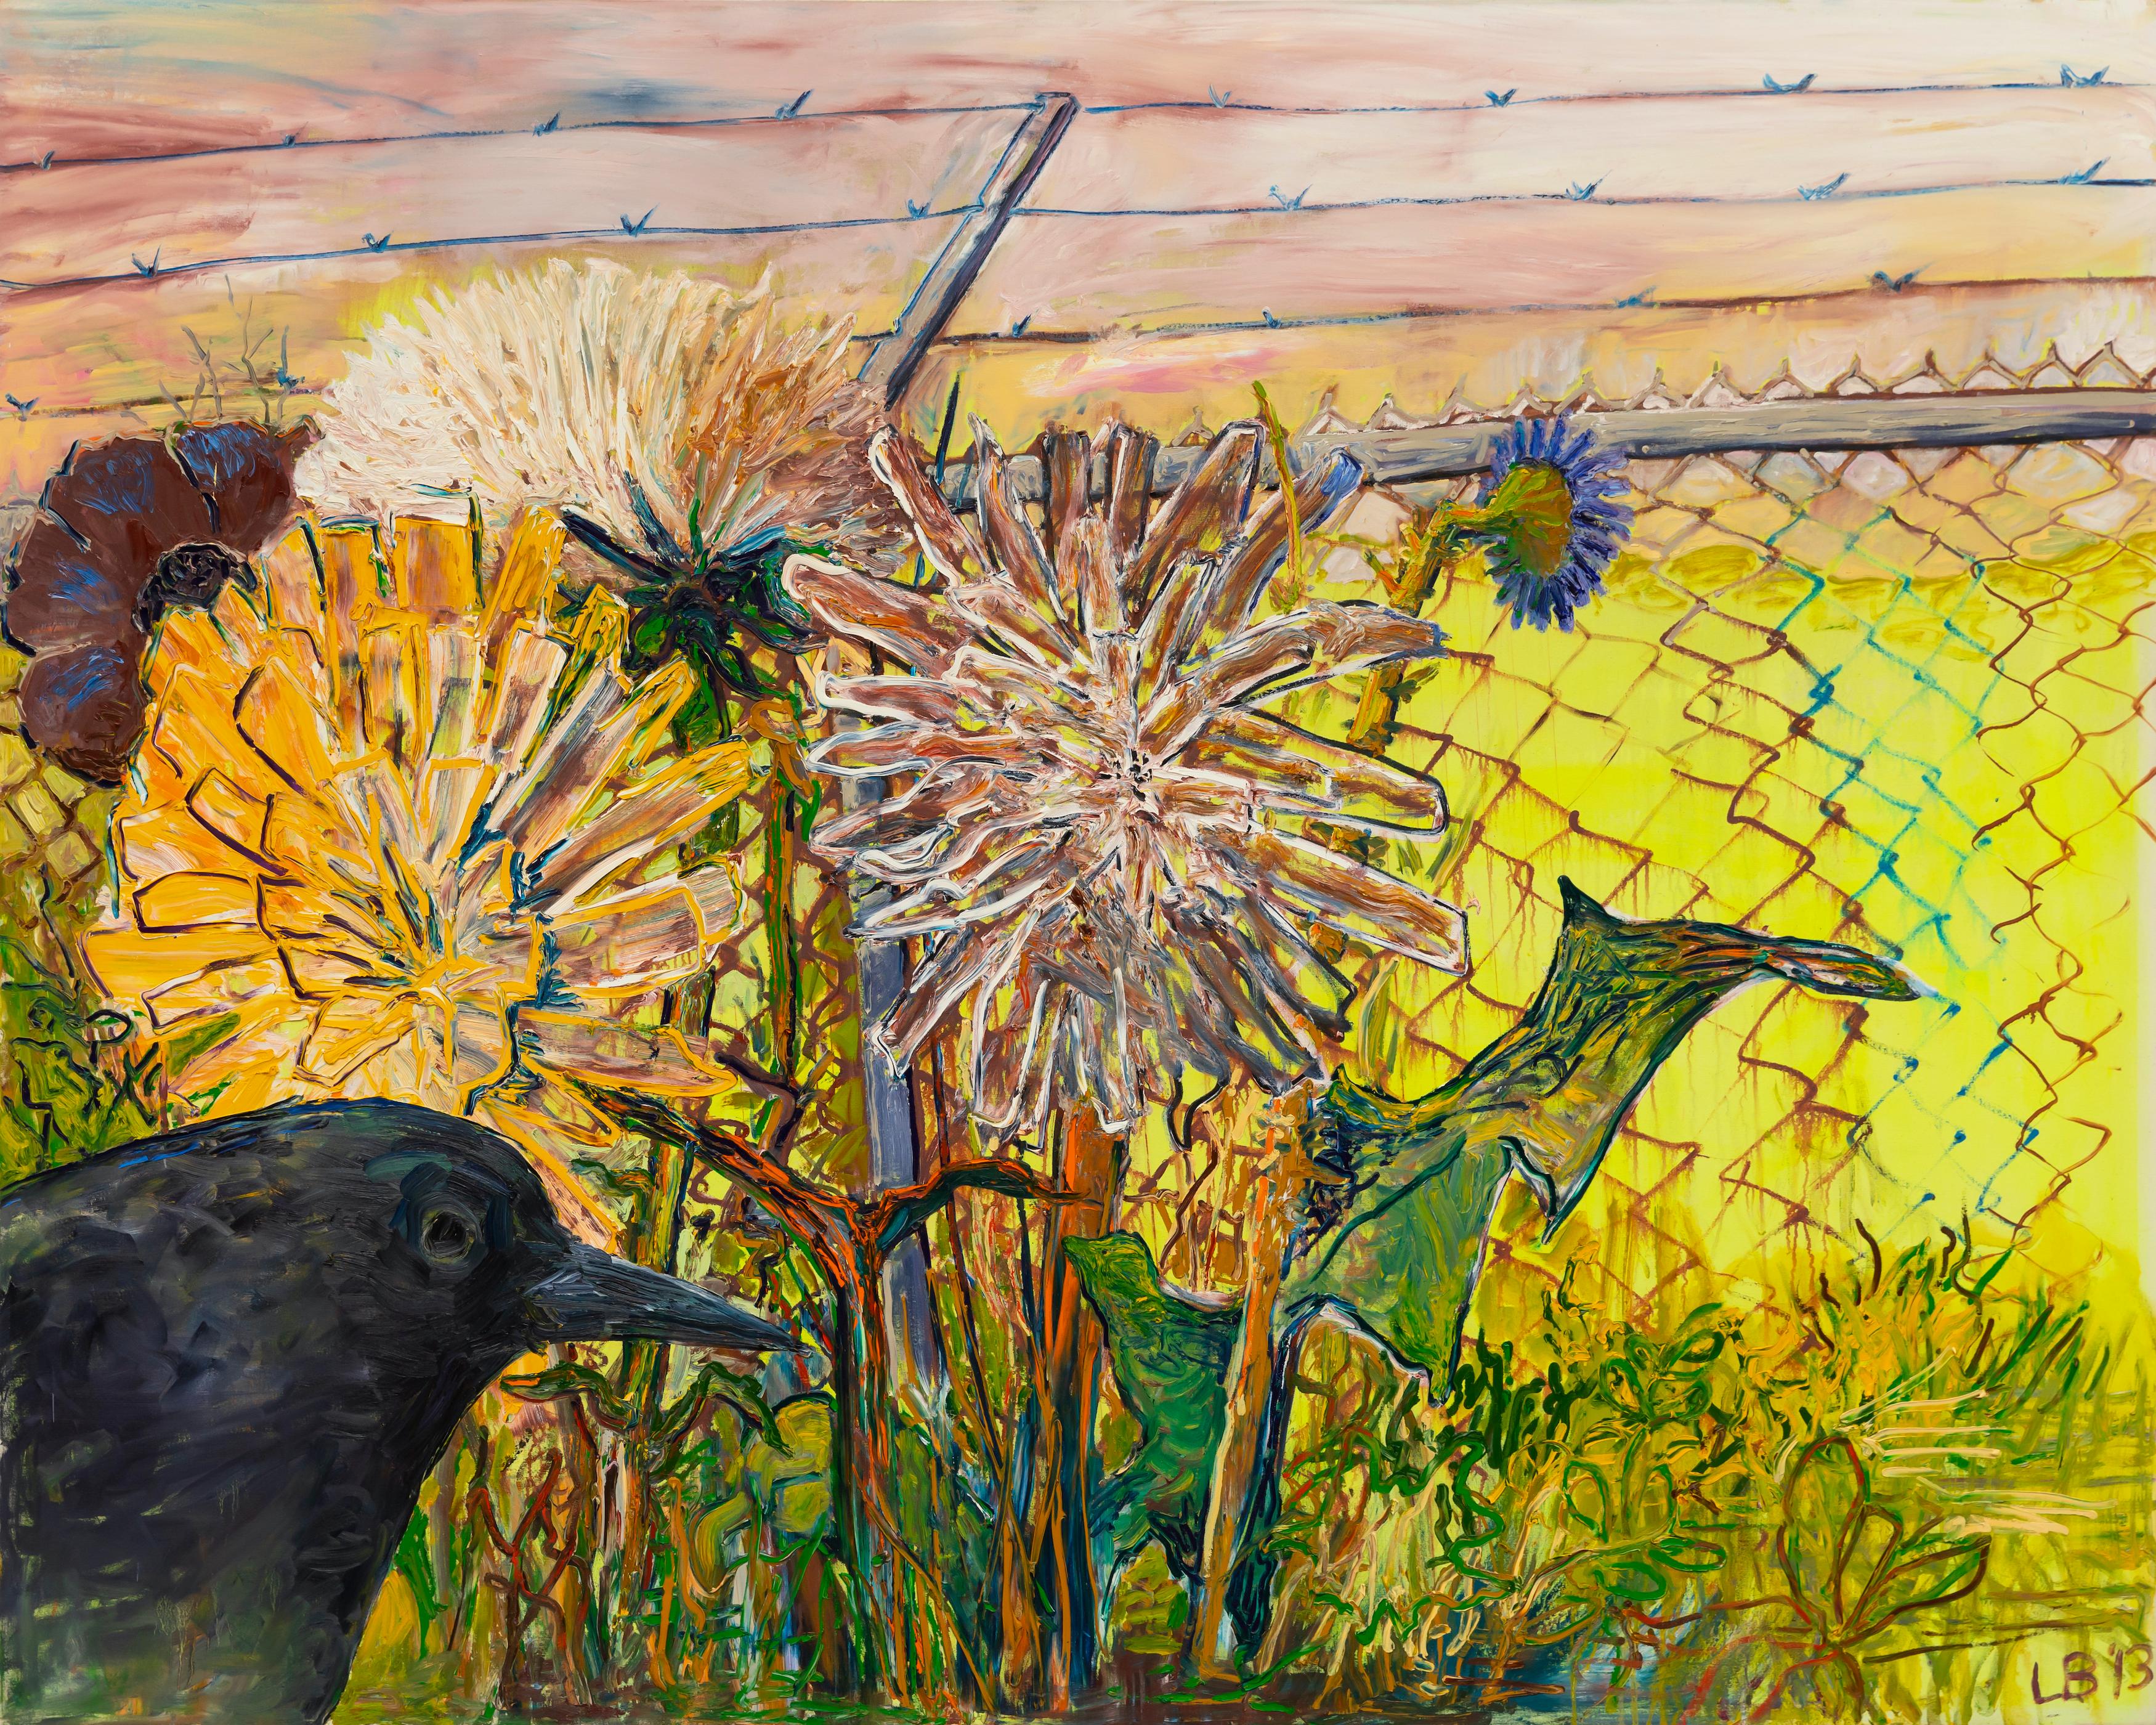 Blackbird and Fence, Oil on Canvas, 2013 - Painting by Leslie Bostrom